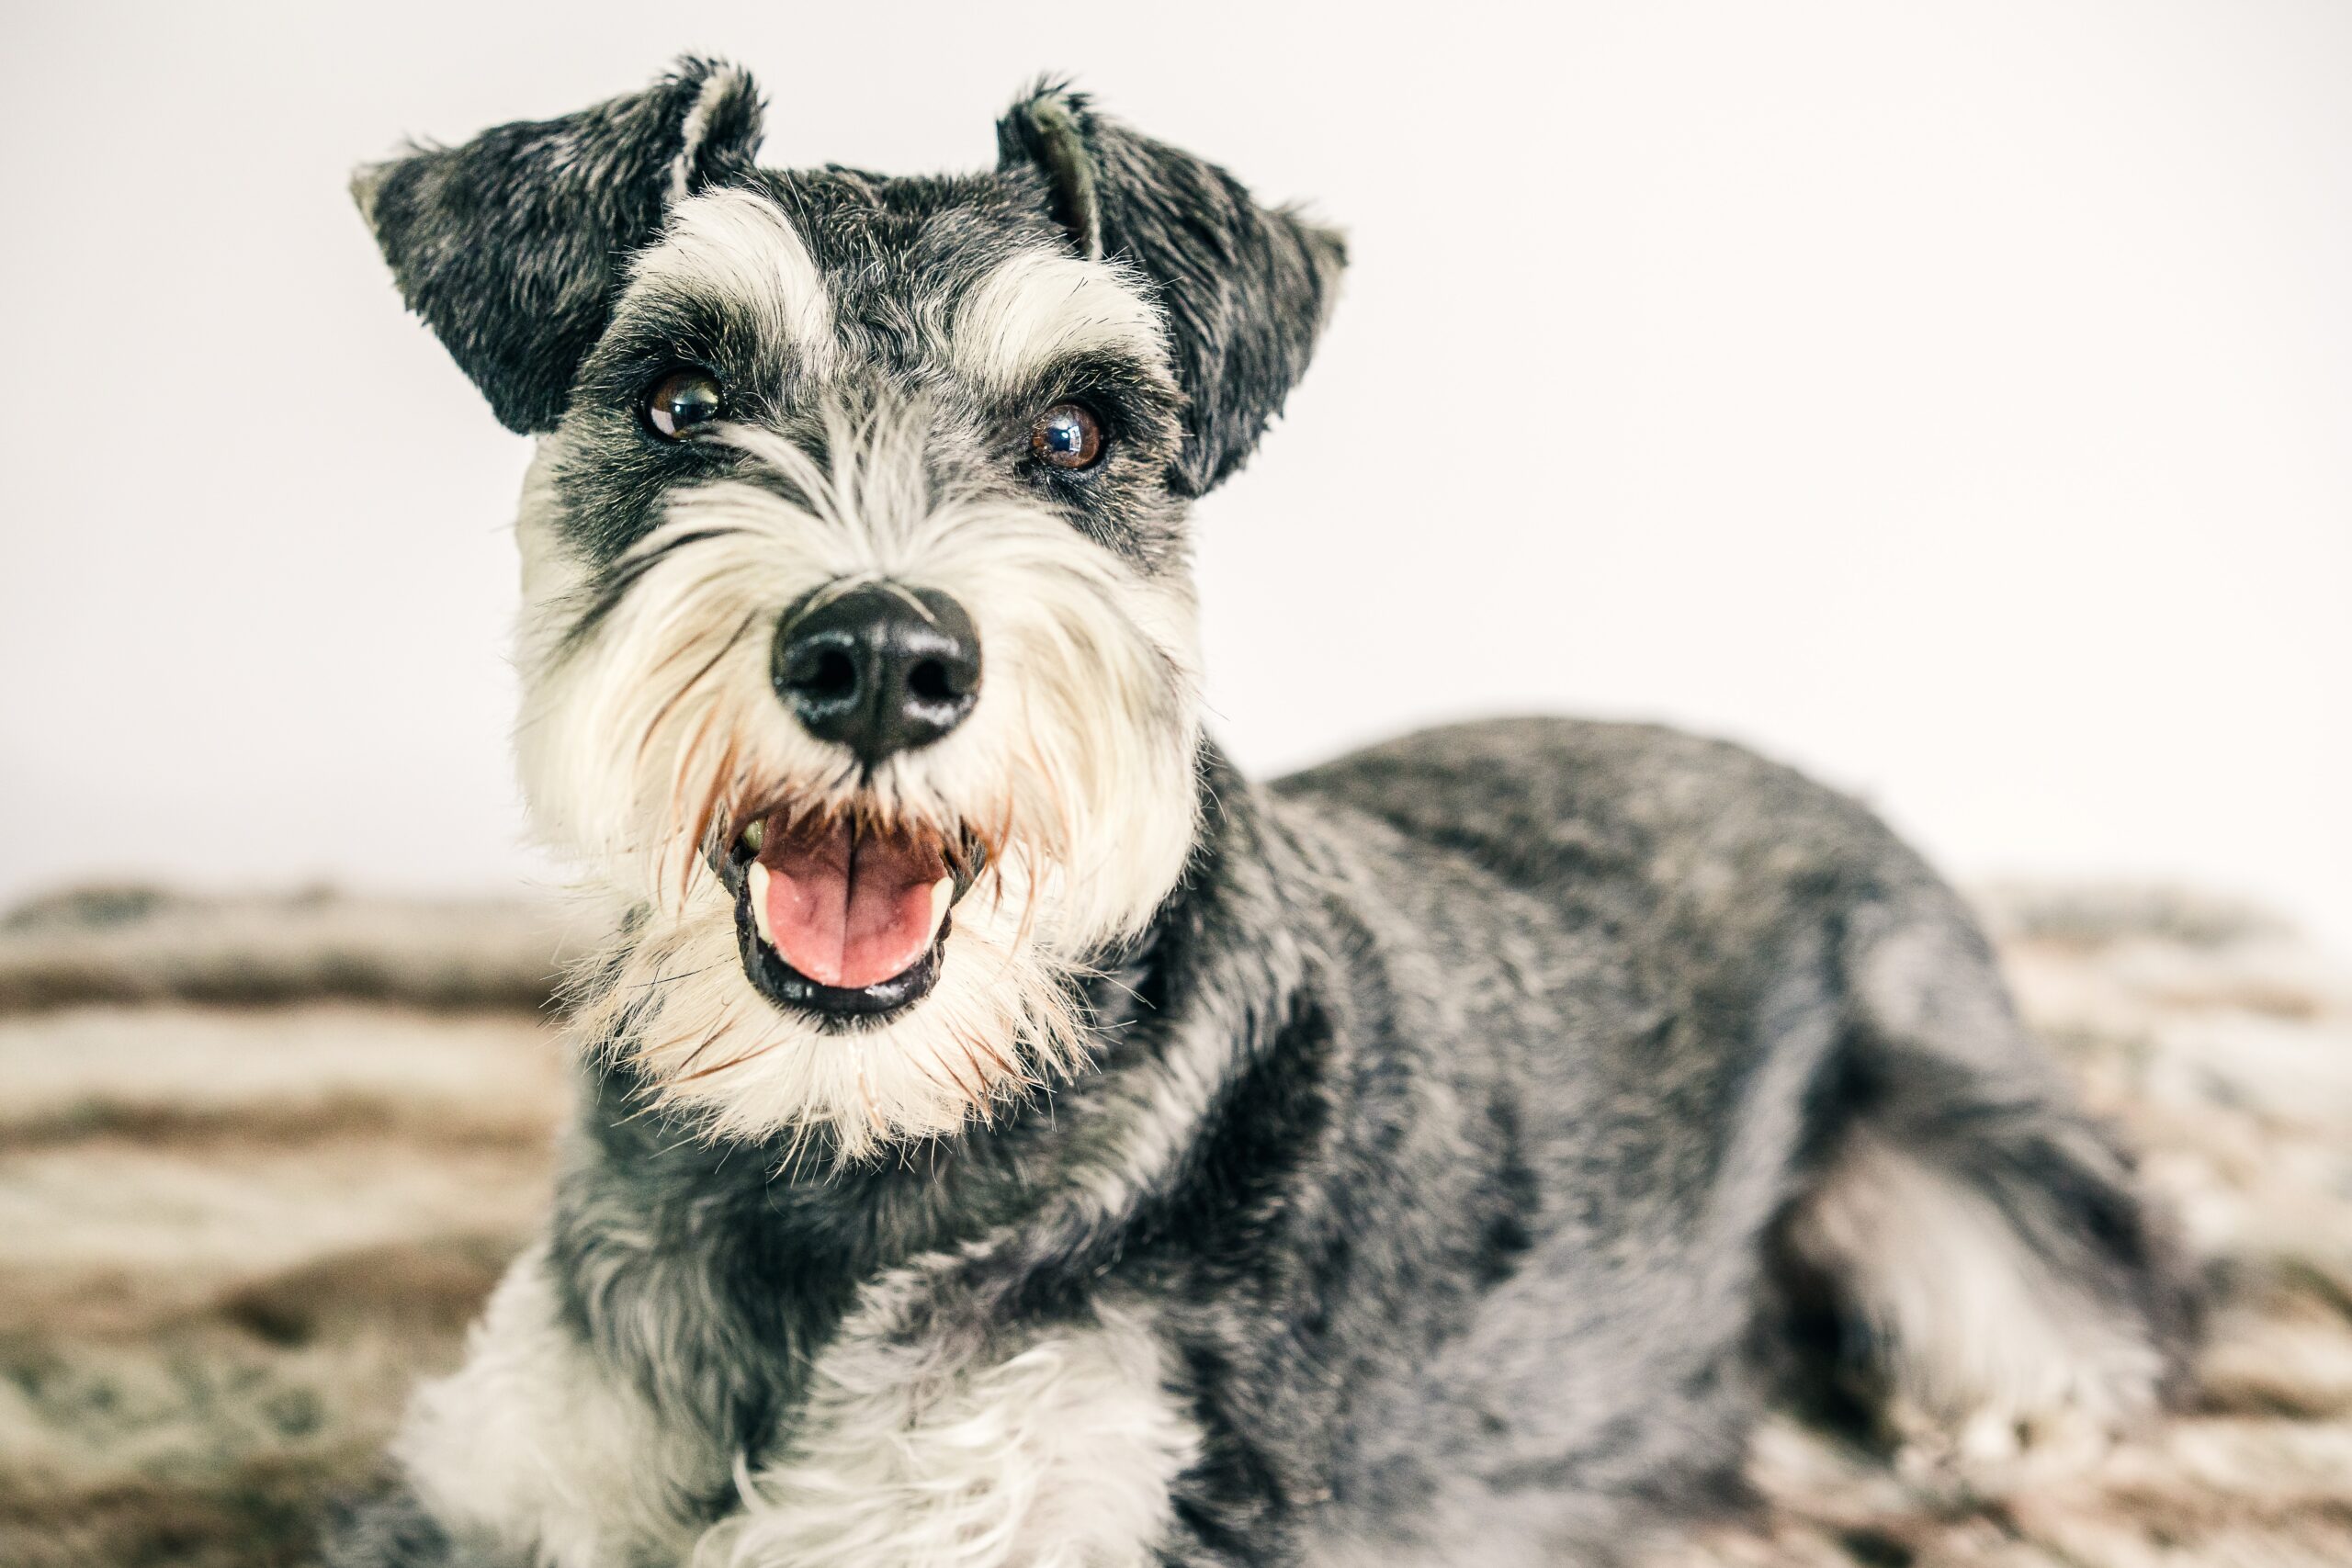  Miniature Schnauzer owners improve their pet's appetite and promote weight gain